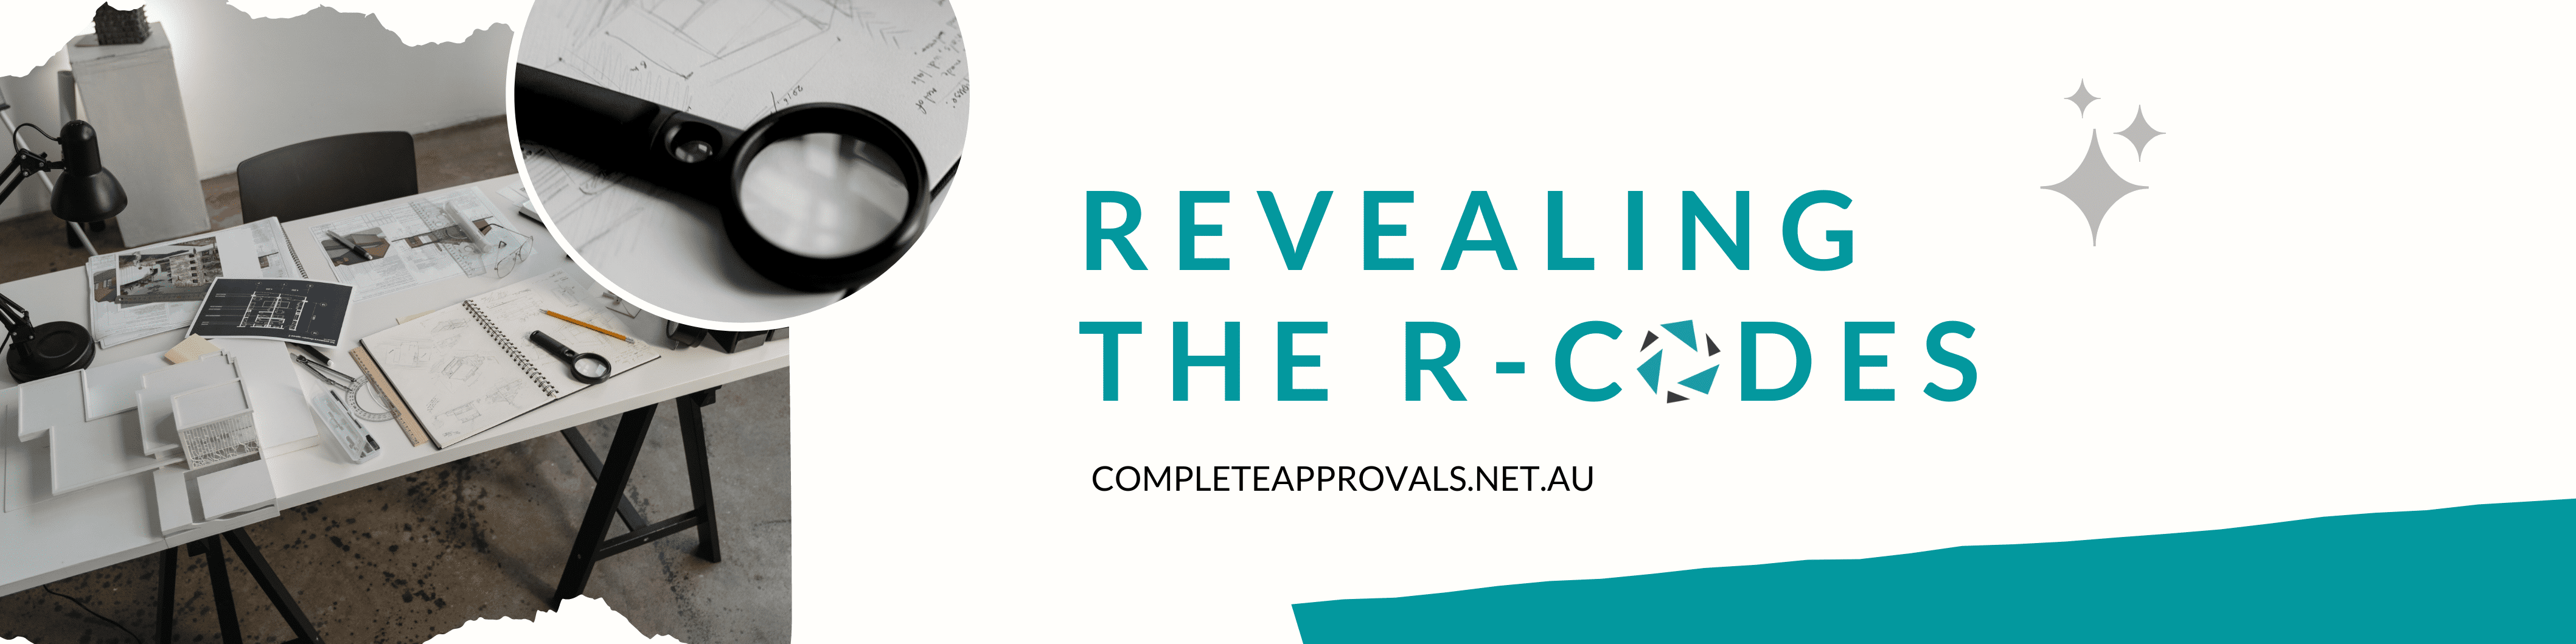 Revealing the RCodes Complete Approvals